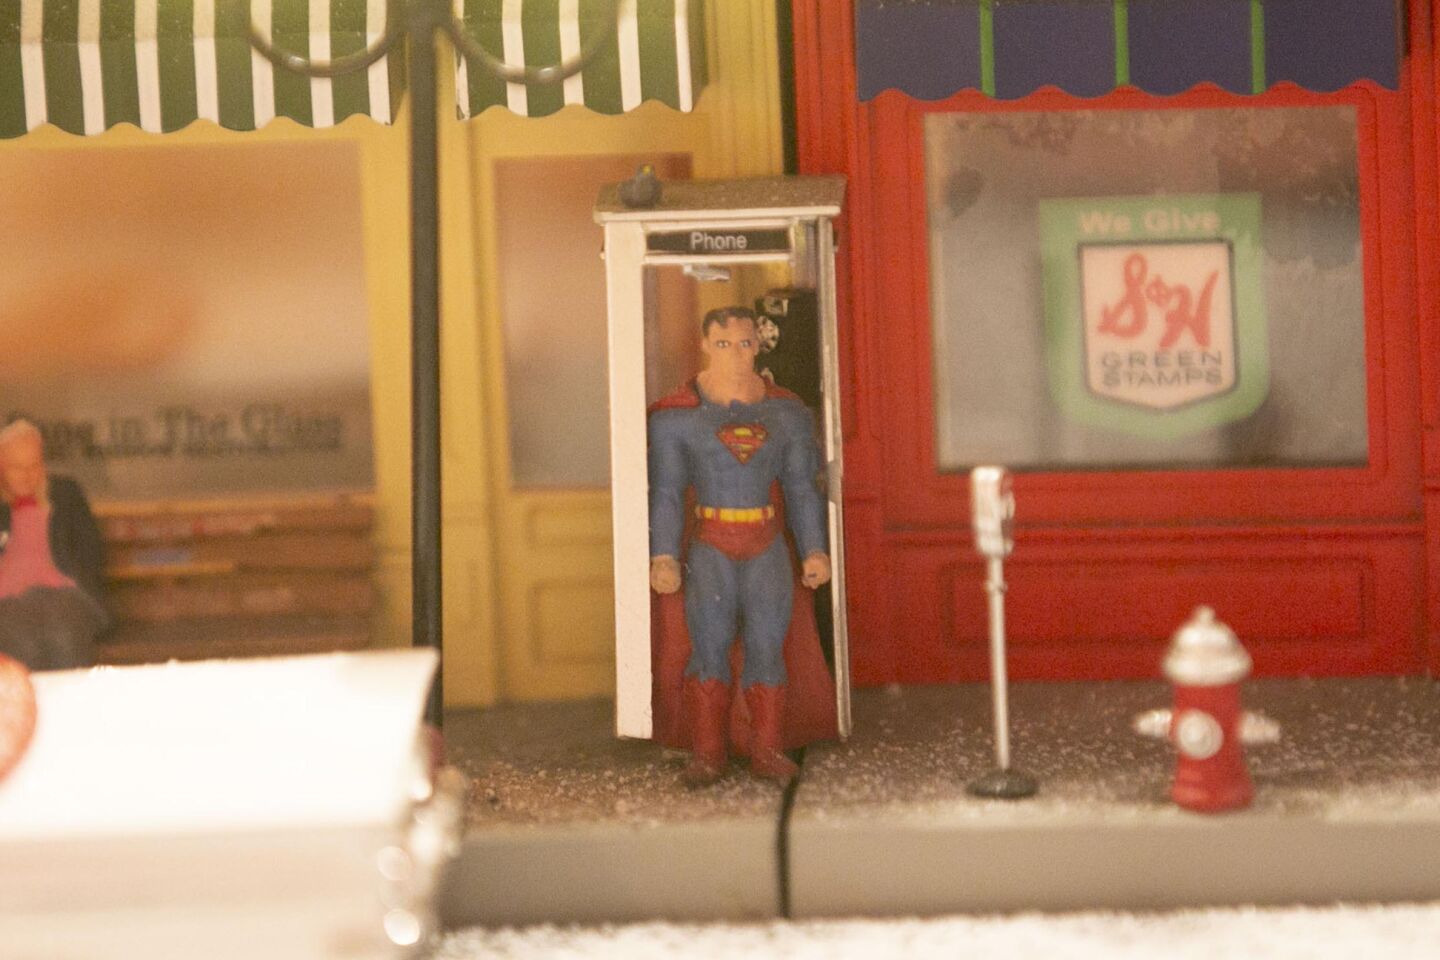 David Lizerbram and his wife Mana Monzavi took over the Old Town Model Railroad Depot, which was in danger of closing. The extensive train layout and its detailed and sometimes humorous dioramas was photographed on Friday, Dec. 13, 2019, at its Old Town, San Diego location. Superman!